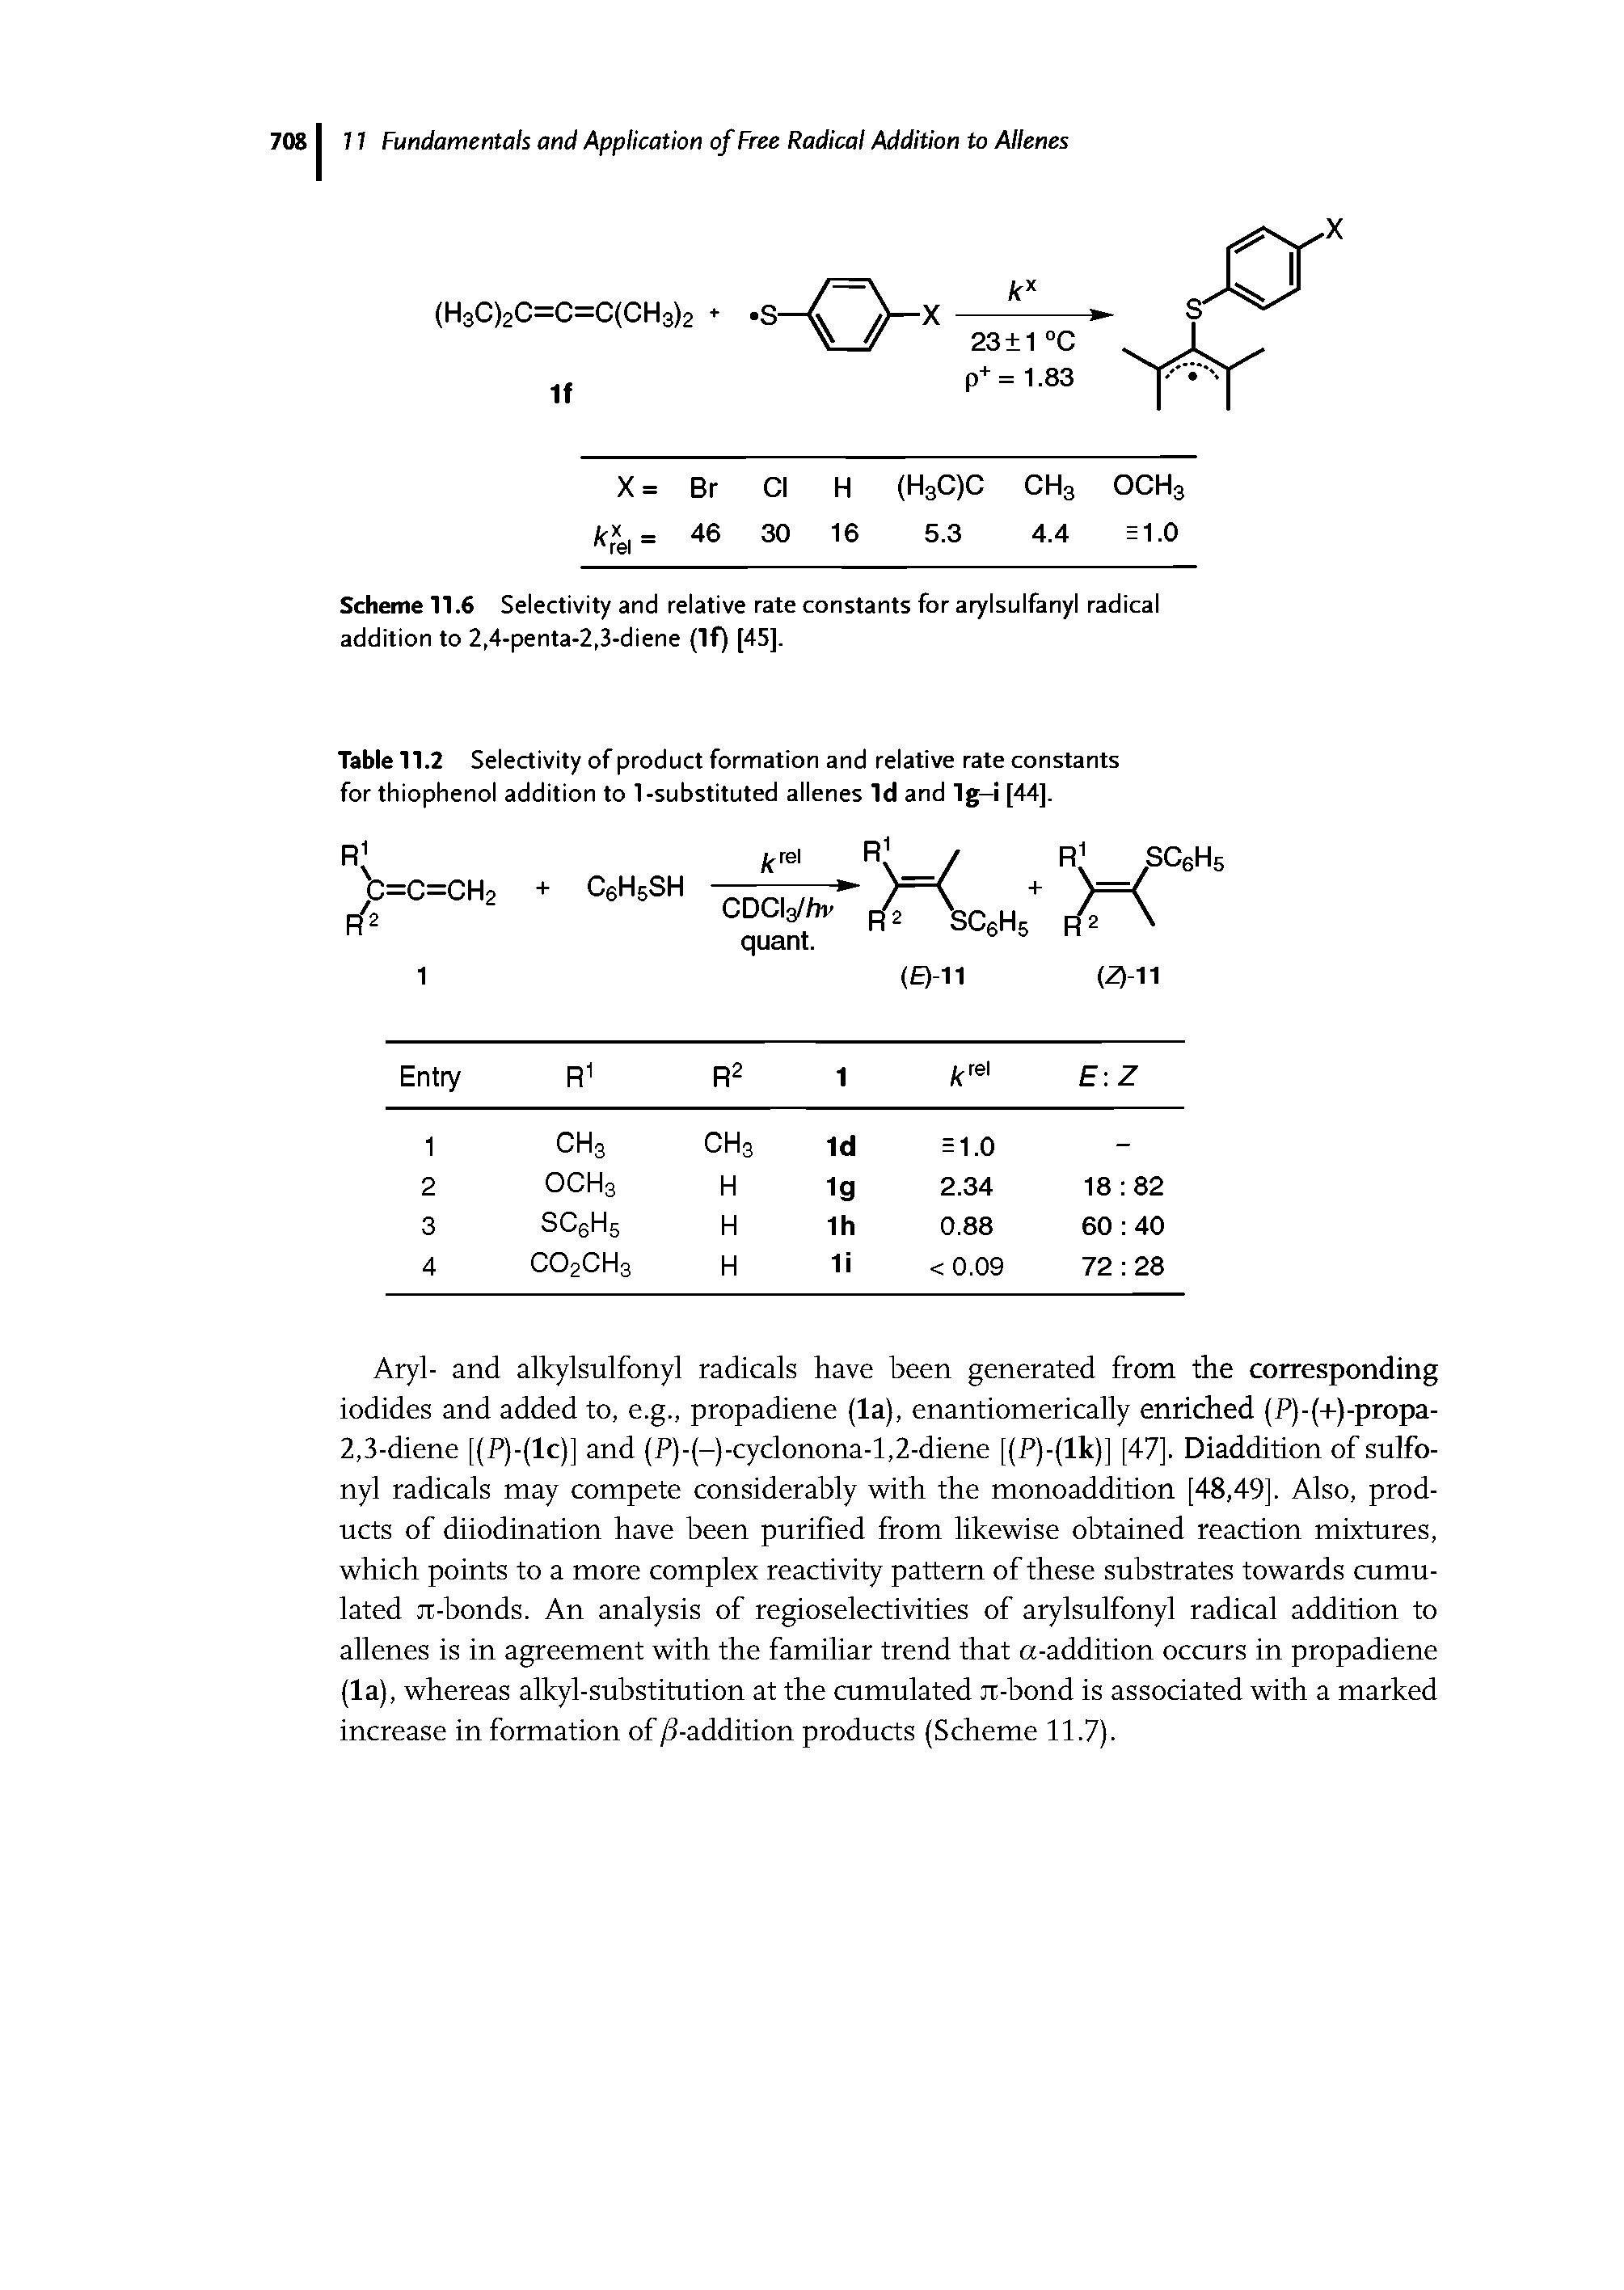 Table 11.2 Selectivity of product formation and relative rate constants for thiophenol addition to 1-substituted allenes Id and lg-i [44],...